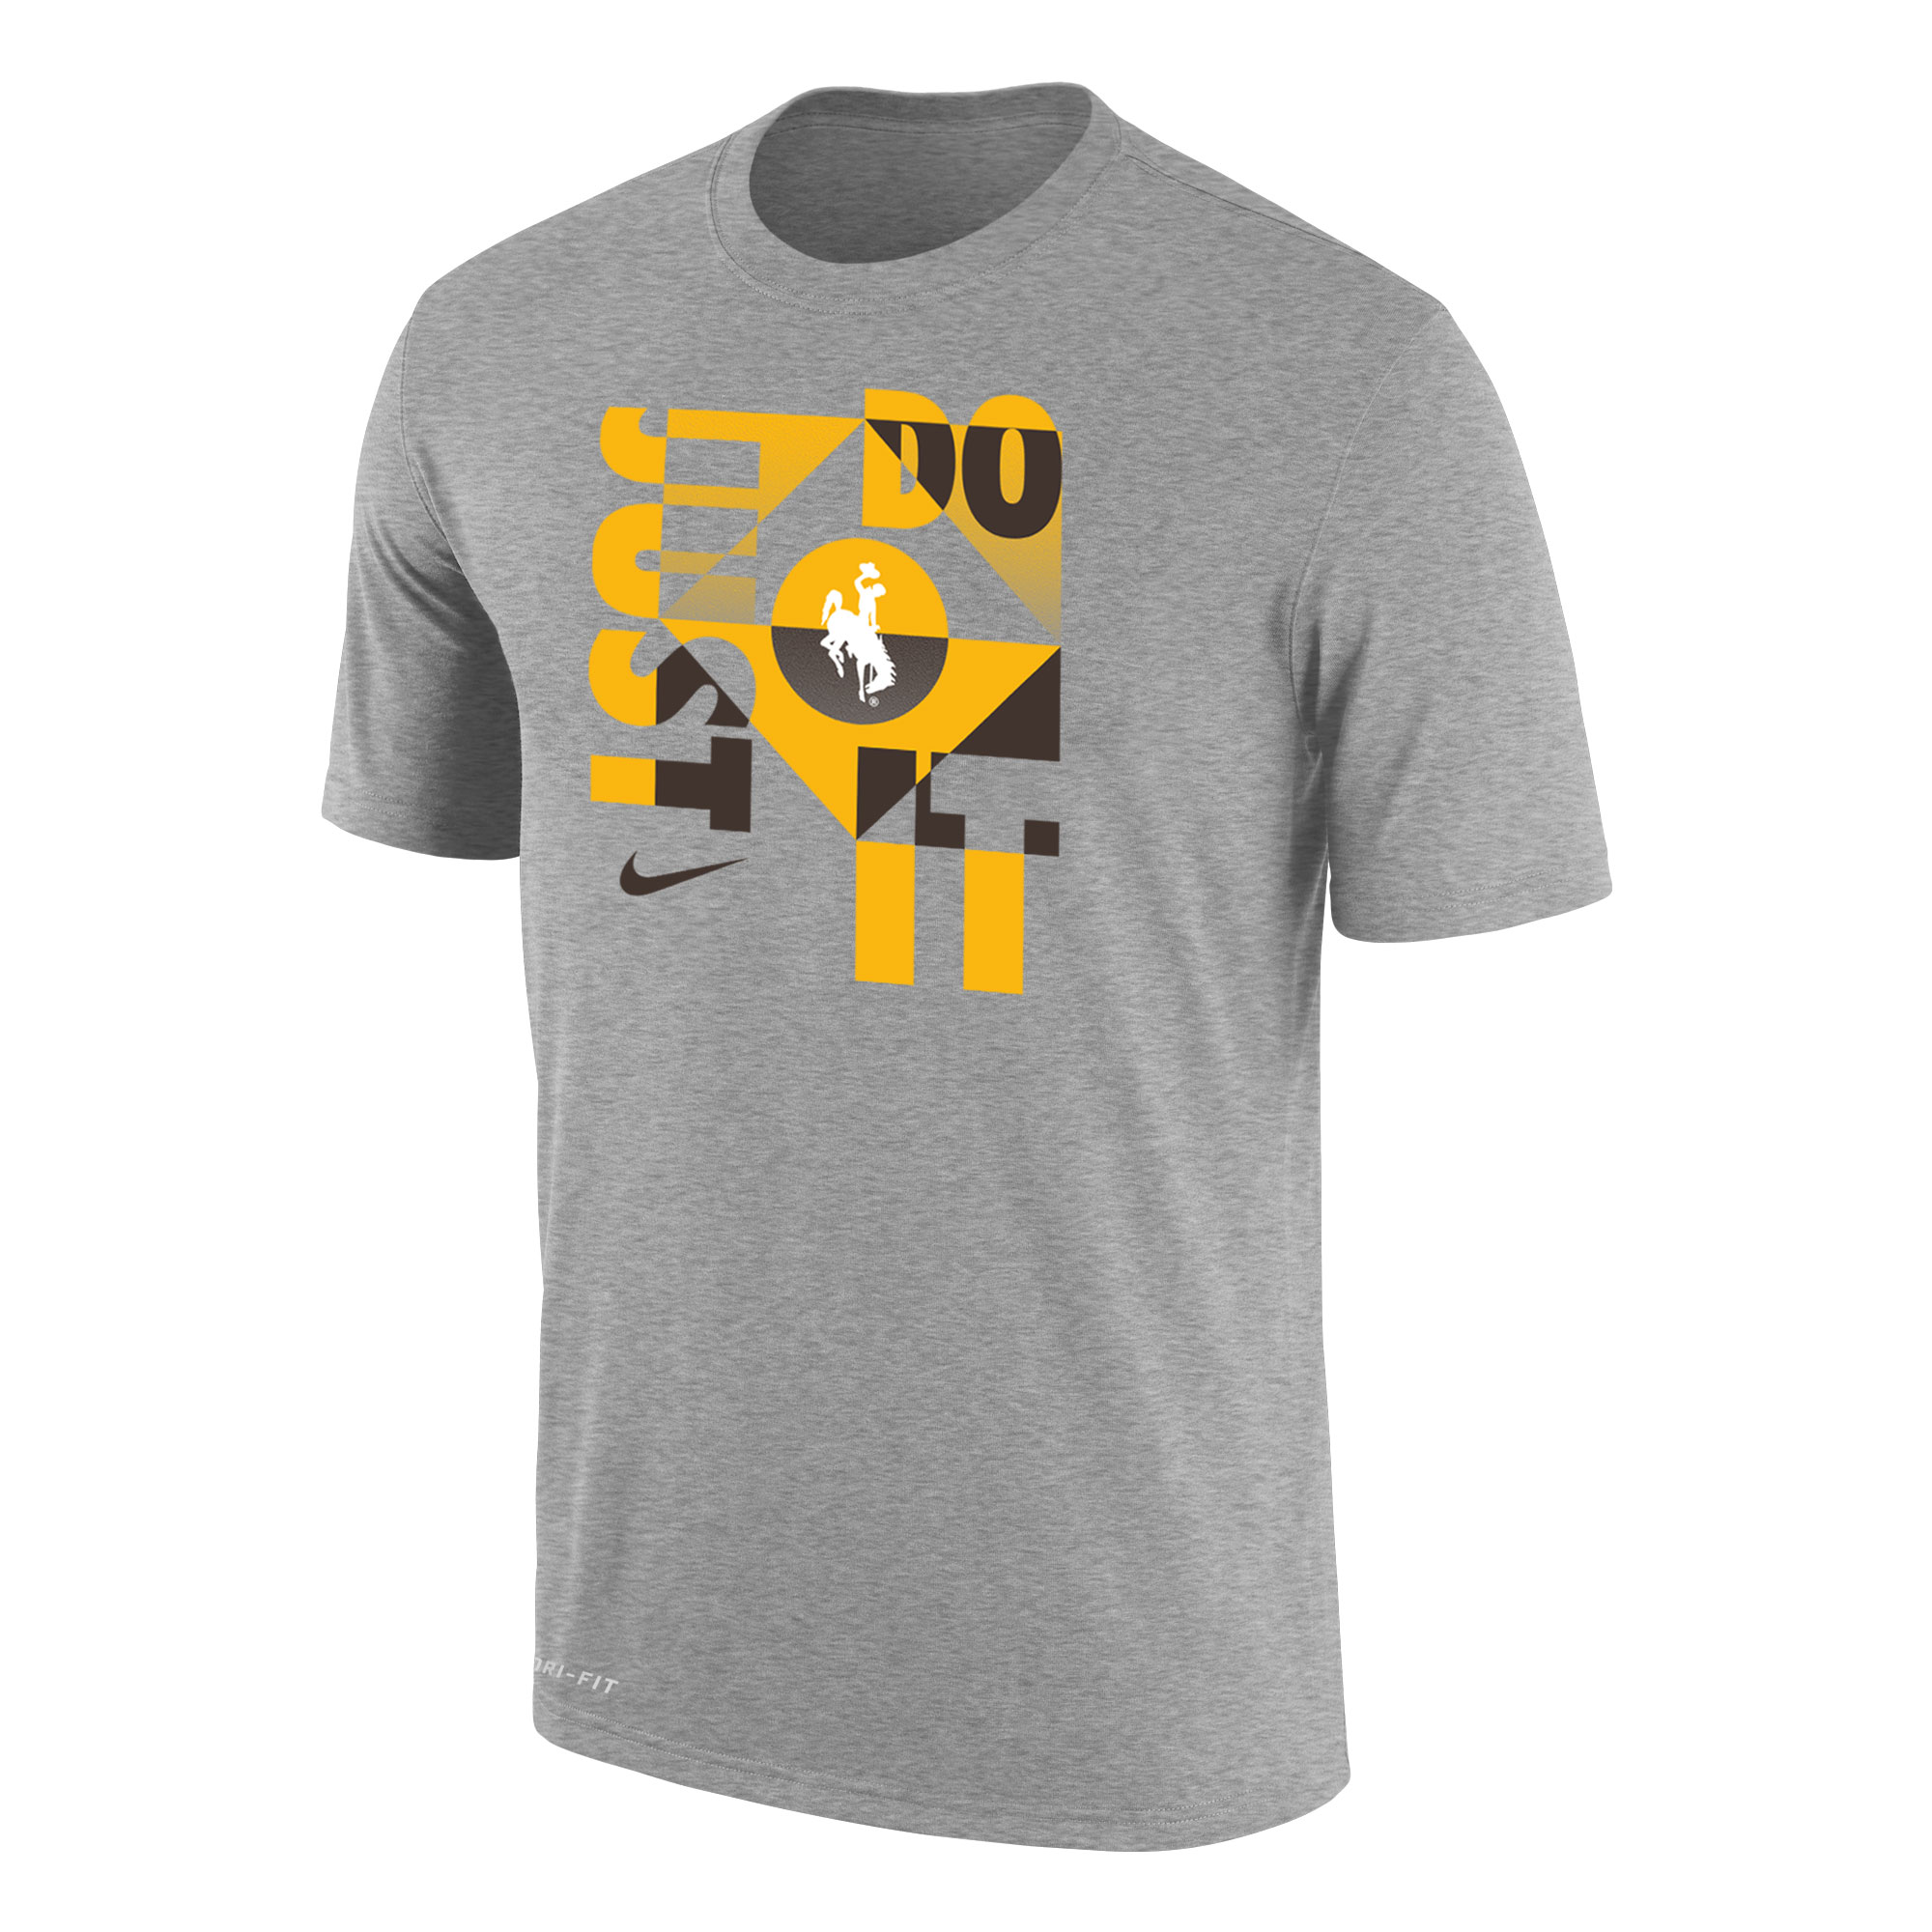 Nike Wyoming Cowboys Just Do It S/S Tee - Heather | University of